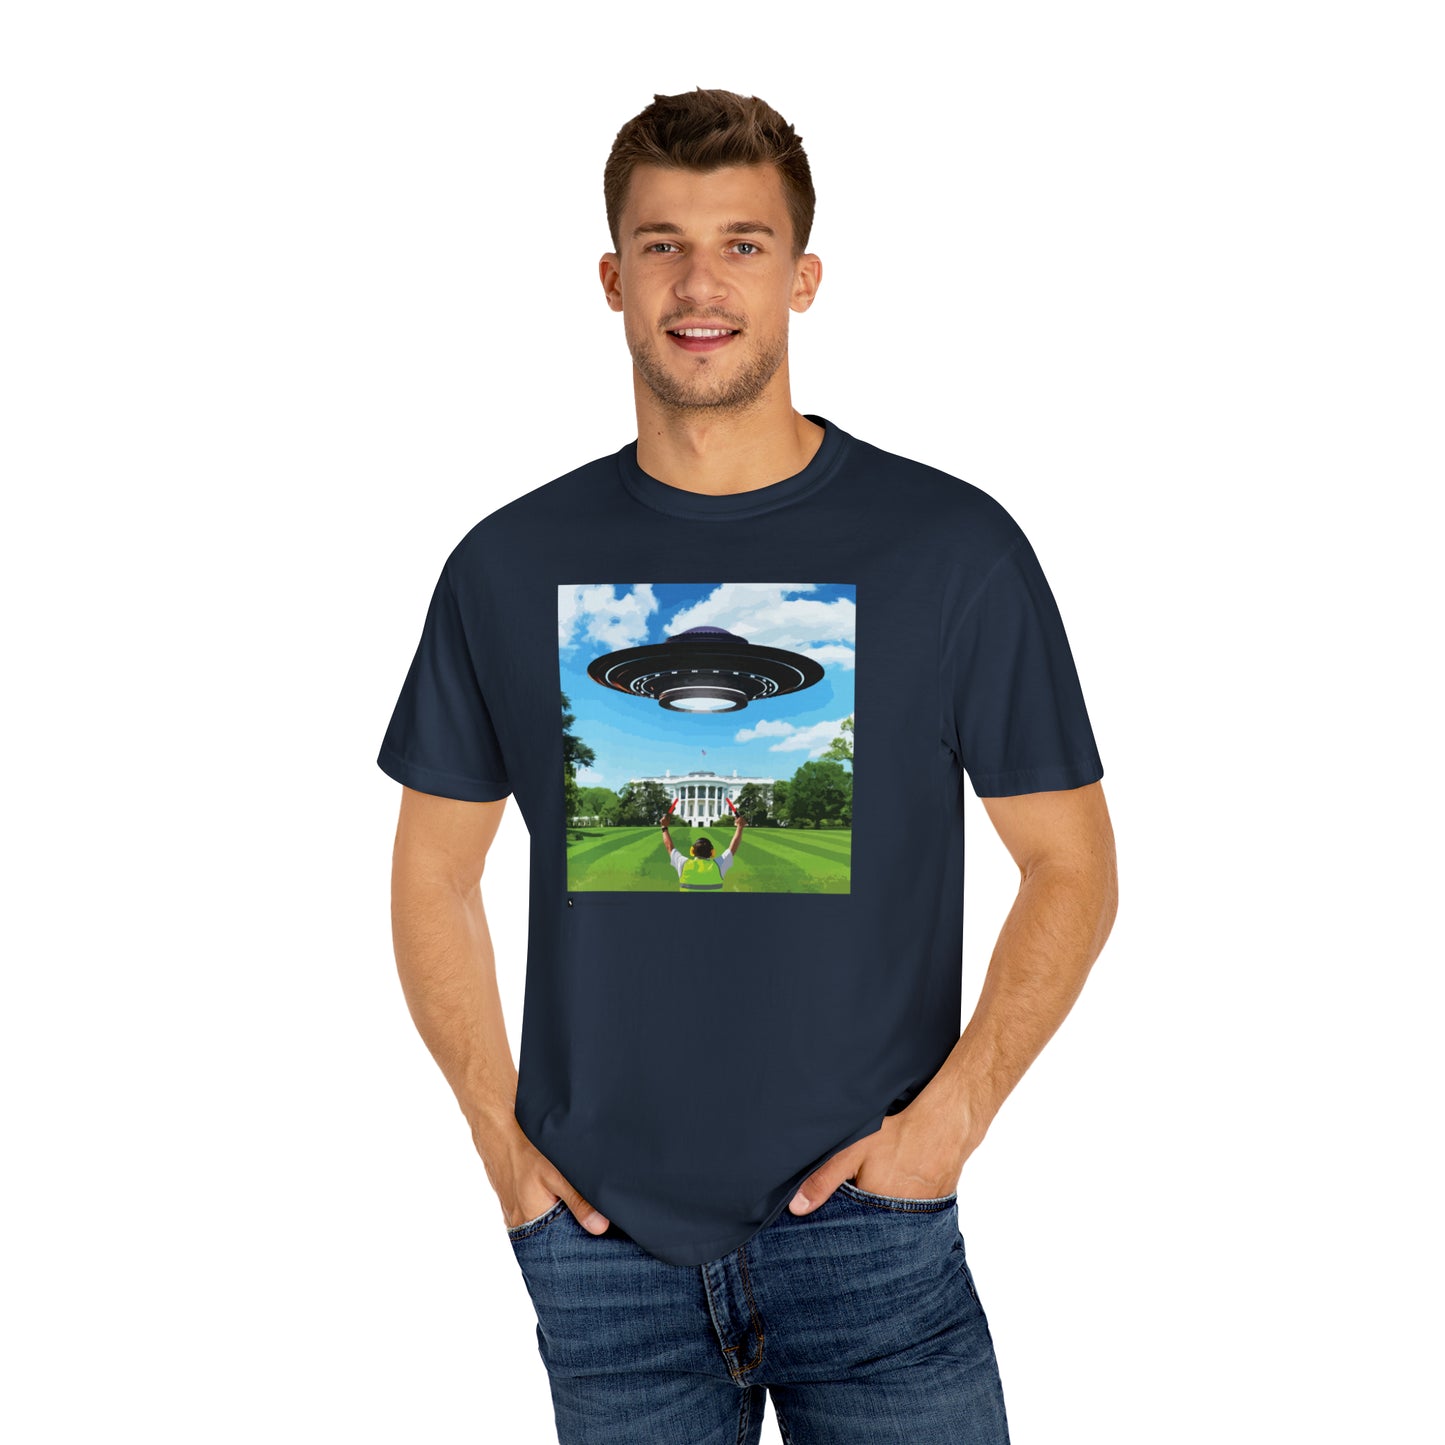 UFO Landing on The White House Lawn T-Shirt